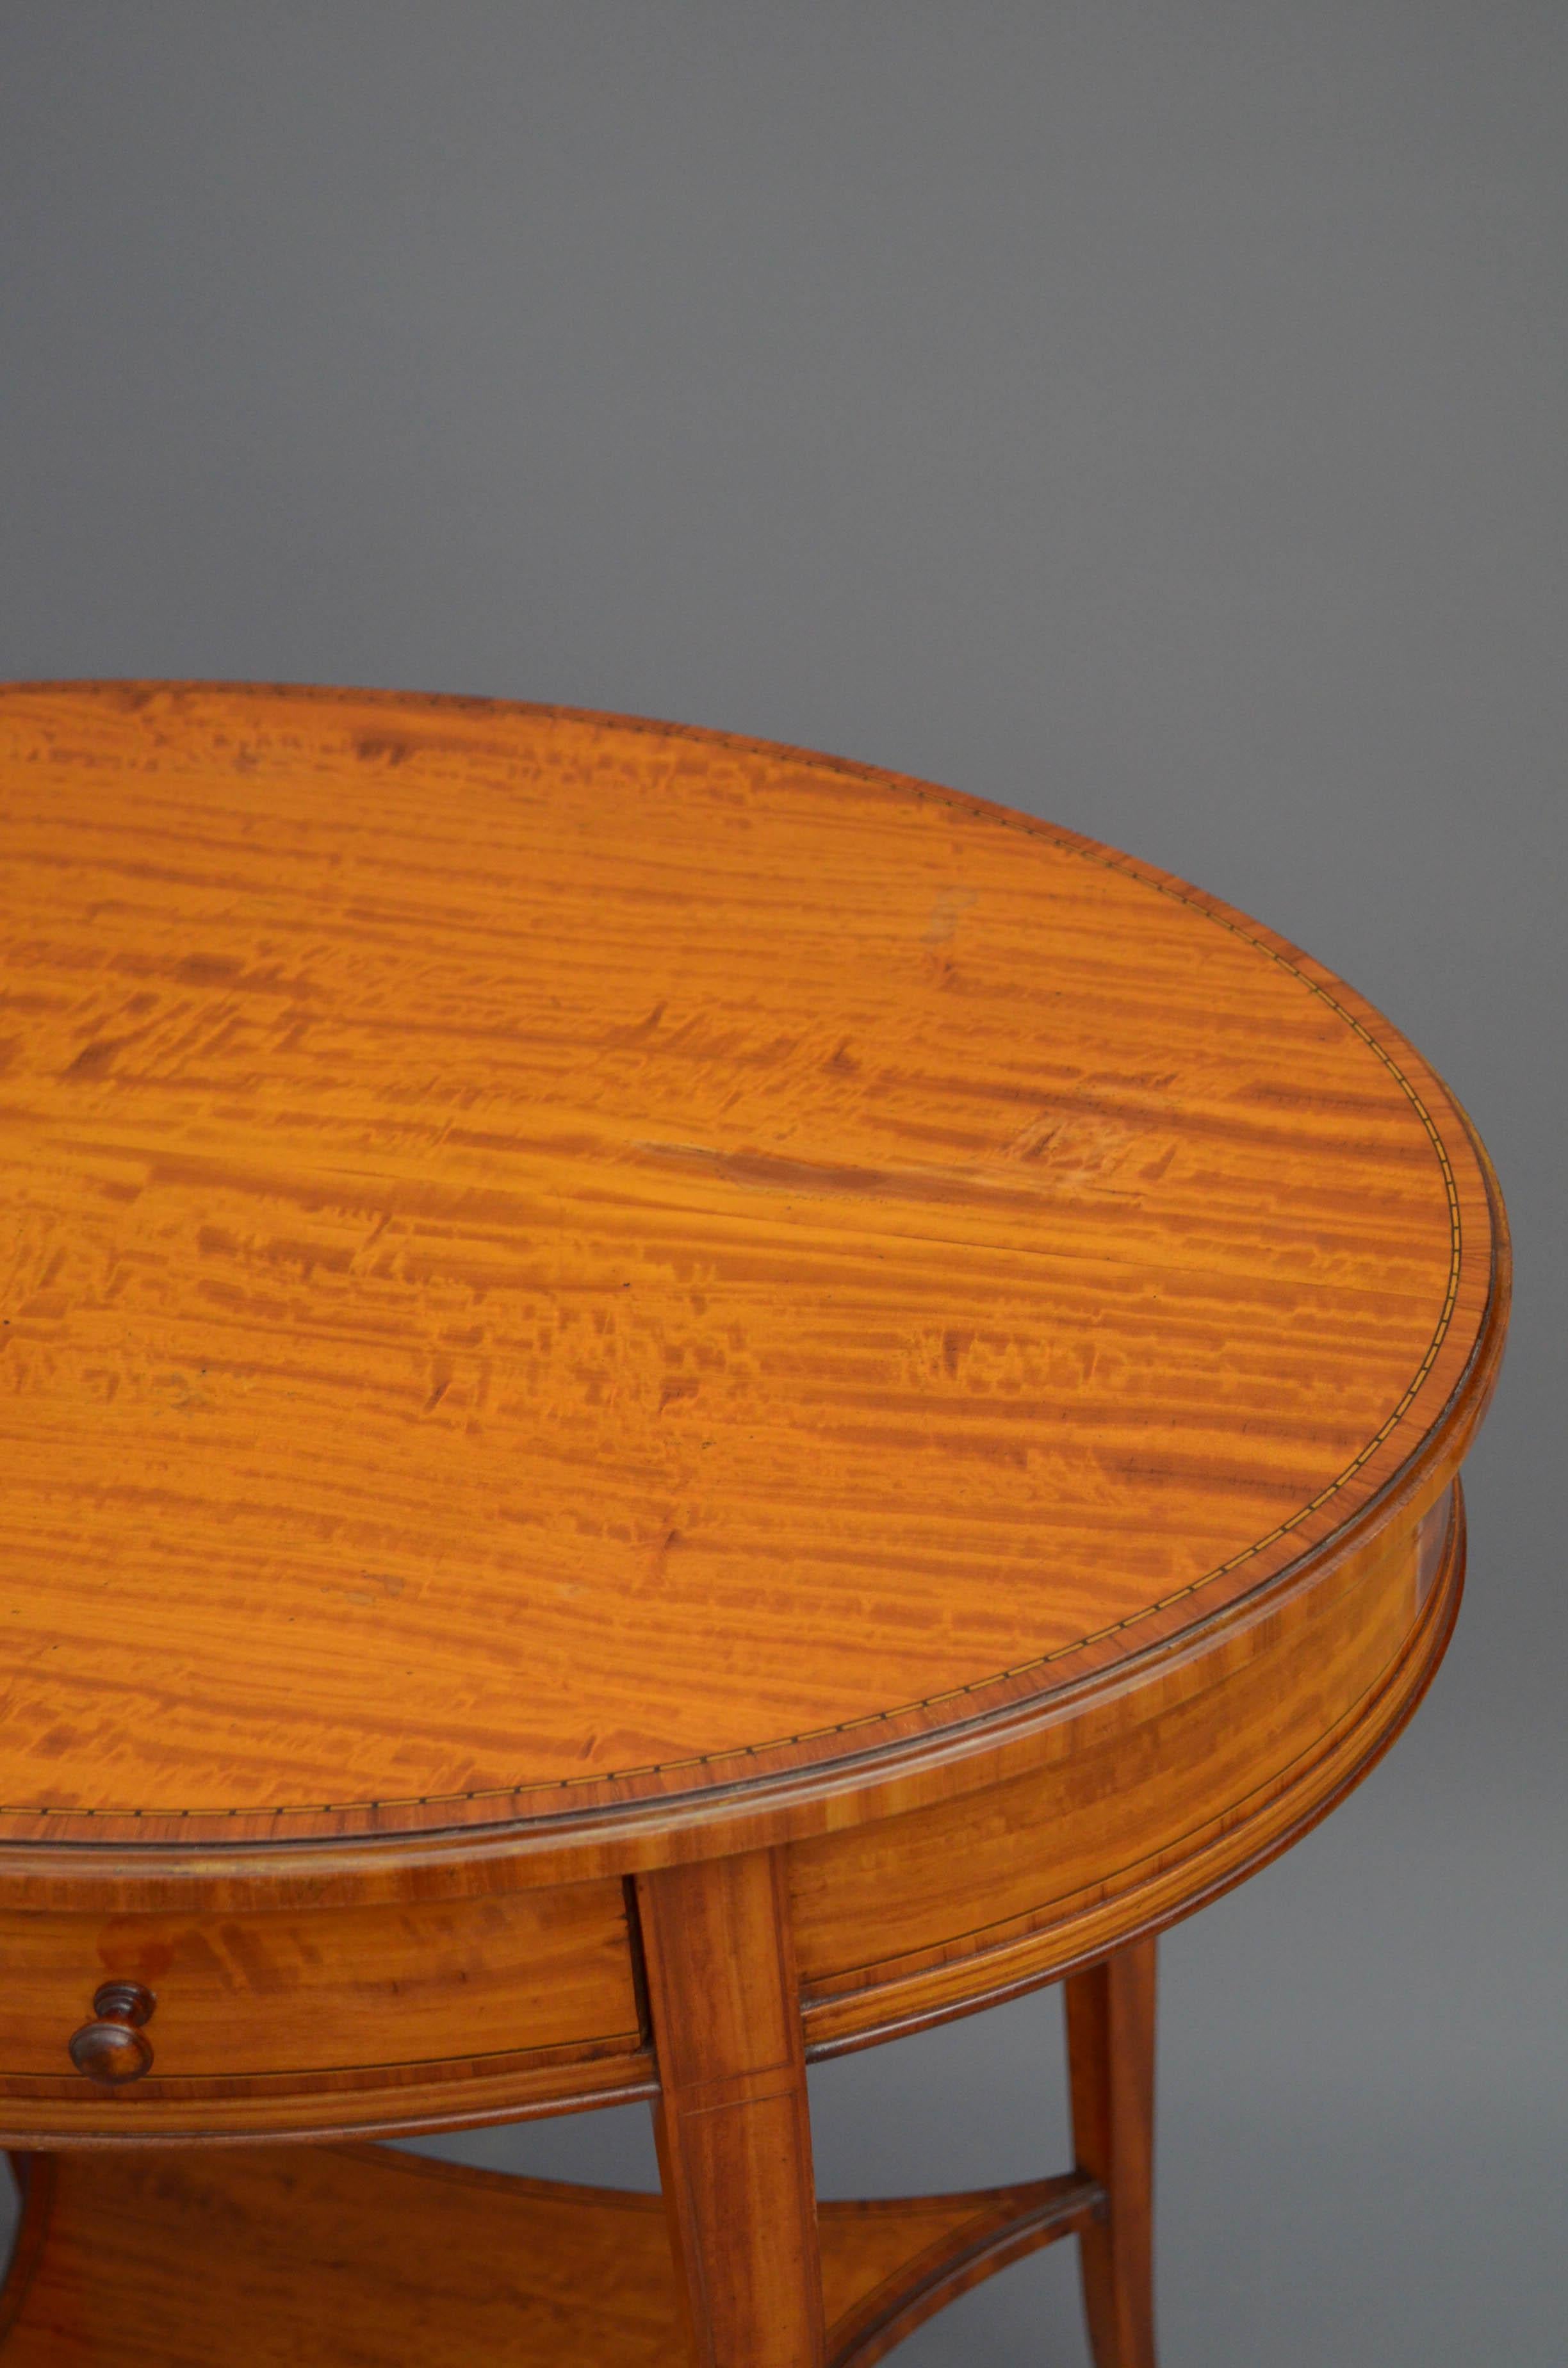 Late Victorian Satinwood Occasional Table In Good Condition For Sale In Whaley Bridge, GB